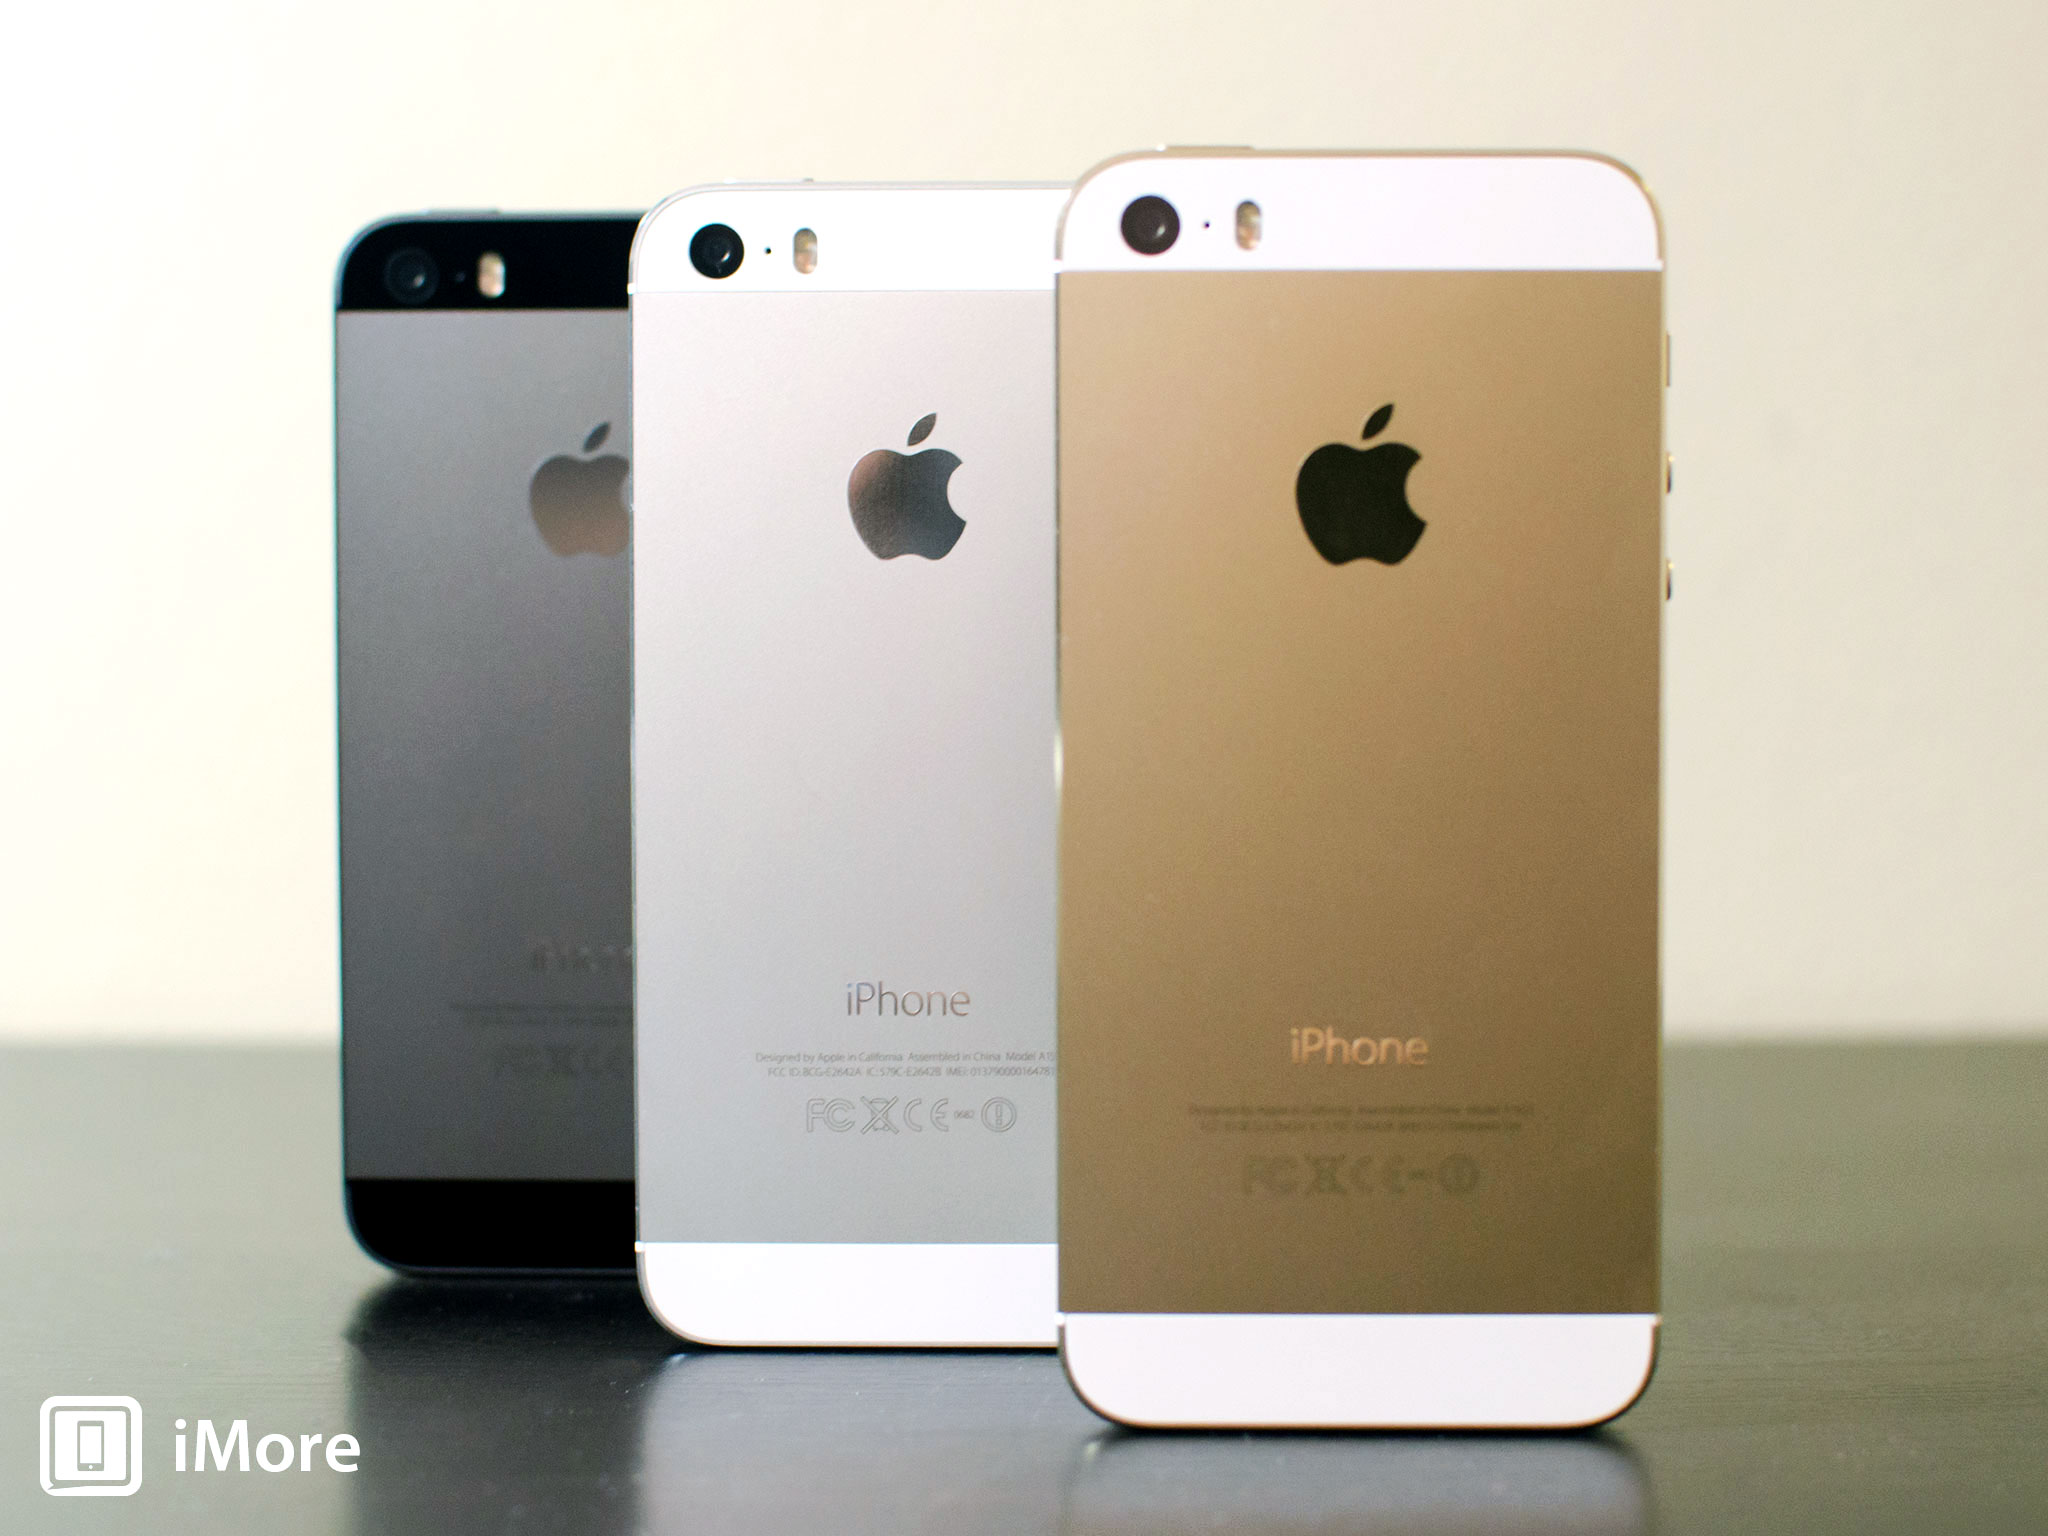 iPhone 5s design and the gold standard